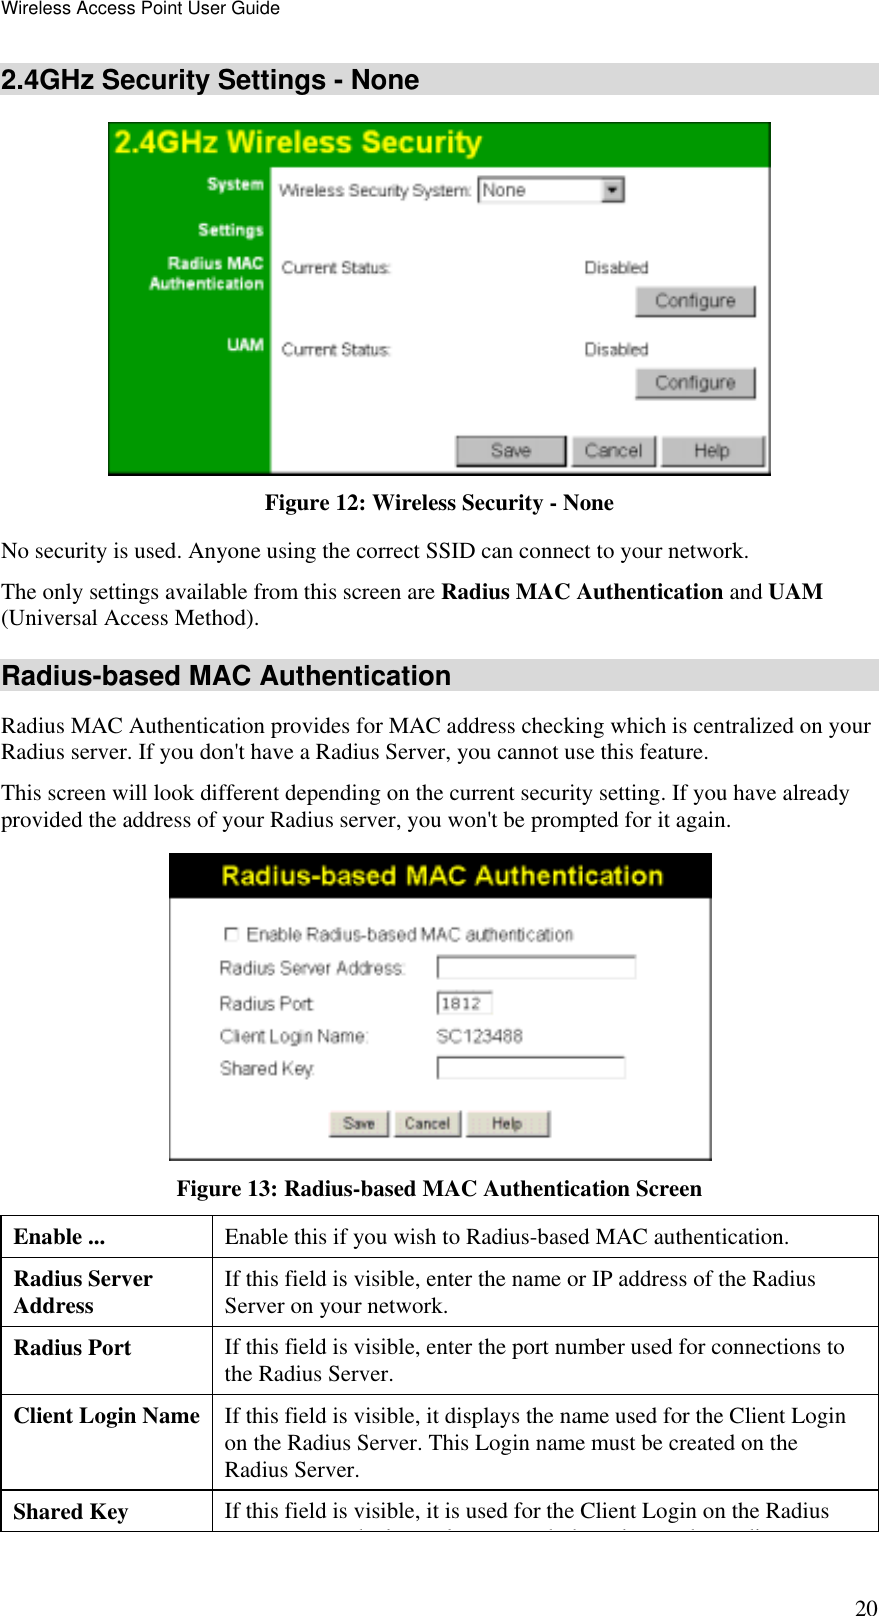 Wireless Access Point User Guide 20 2.4GHz Security Settings - None  Figure 12: Wireless Security - None No security is used. Anyone using the correct SSID can connect to your network. The only settings available from this screen are Radius MAC Authentication and UAM (Universal Access Method). Radius-based MAC Authentication Radius MAC Authentication provides for MAC address checking which is centralized on your Radius server. If you don&apos;t have a Radius Server, you cannot use this feature.  This screen will look different depending on the current security setting. If you have already provided the address of your Radius server, you won&apos;t be prompted for it again.  Figure 13: Radius-based MAC Authentication Screen Enable ...  Enable this if you wish to Radius-based MAC authentication. Radius Server Address  If this field is visible, enter the name or IP address of the Radius Server on your network. Radius Port  If this field is visible, enter the port number used for connections to the Radius Server. Client Login Name  If this field is visible, it displays the name used for the Client Login on the Radius Server. This Login name must be created on the Radius Server. Shared Key  If this field is visible, it is used for the Client Login on the Radius hk l hh l h di